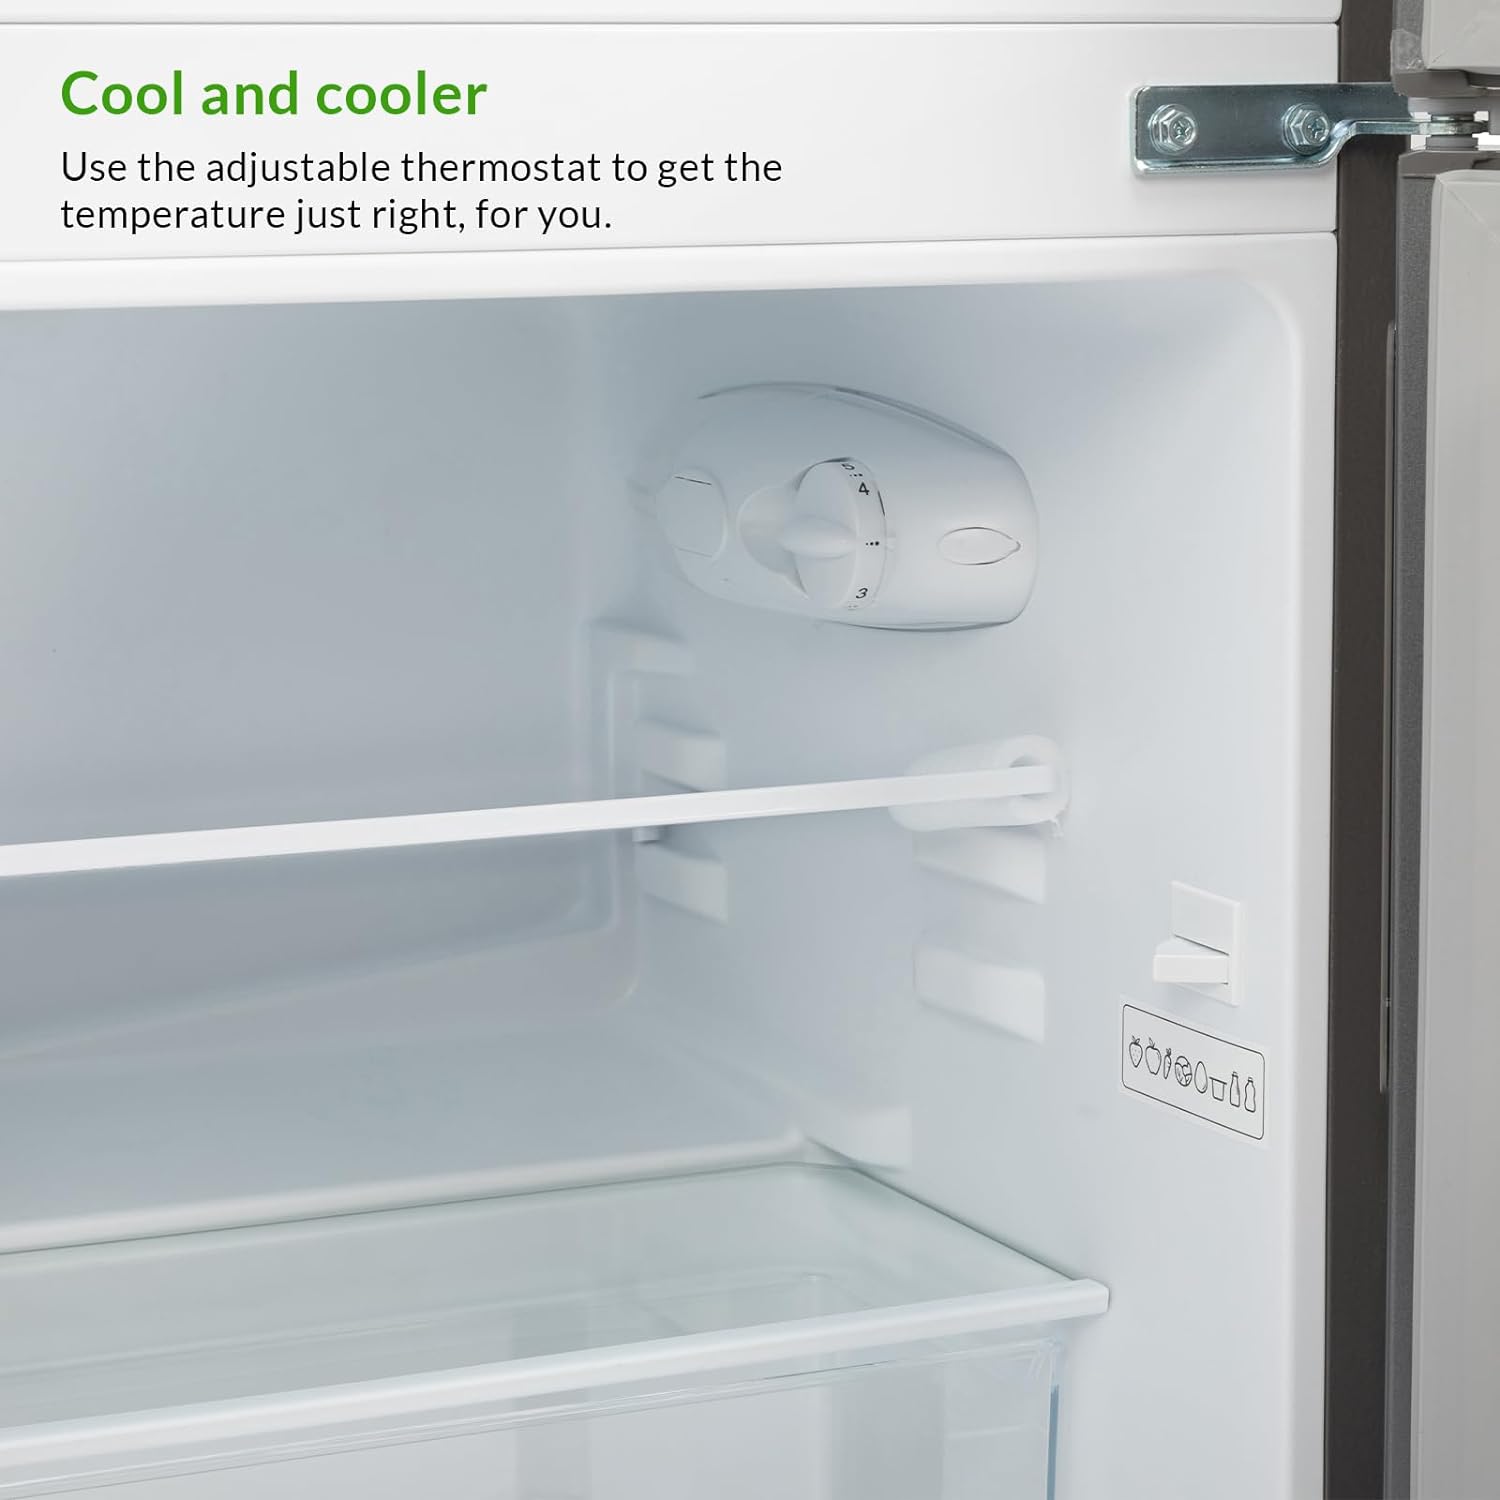 Willow WW50UCFF 86L Under Counter Fridge Freezer with 4* Freezer Rating, Adjustable Thermostat, Low Noise Level, 2 Years Warranty - White - Amazing Gadgets Outlet